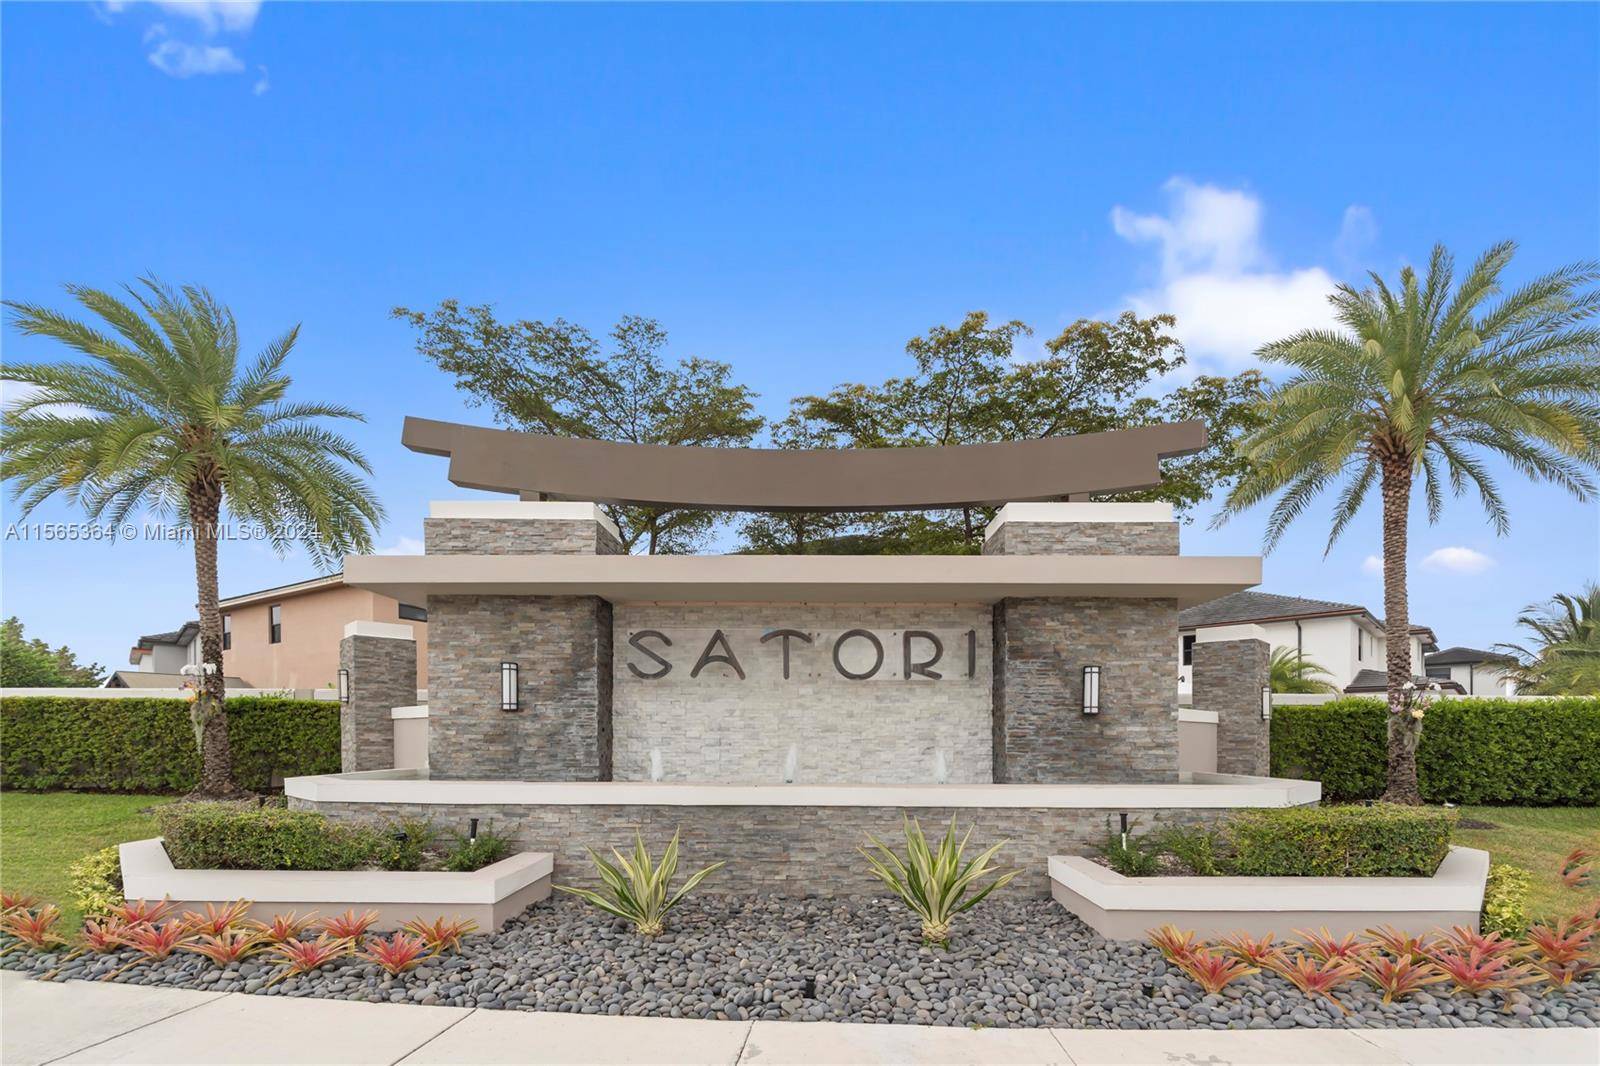 Make this Elegant and Contemporary Lake front 5 Bedroom, 4 1 2 Bath, Located in the Prestigious Community of SATORI, a private gated community.